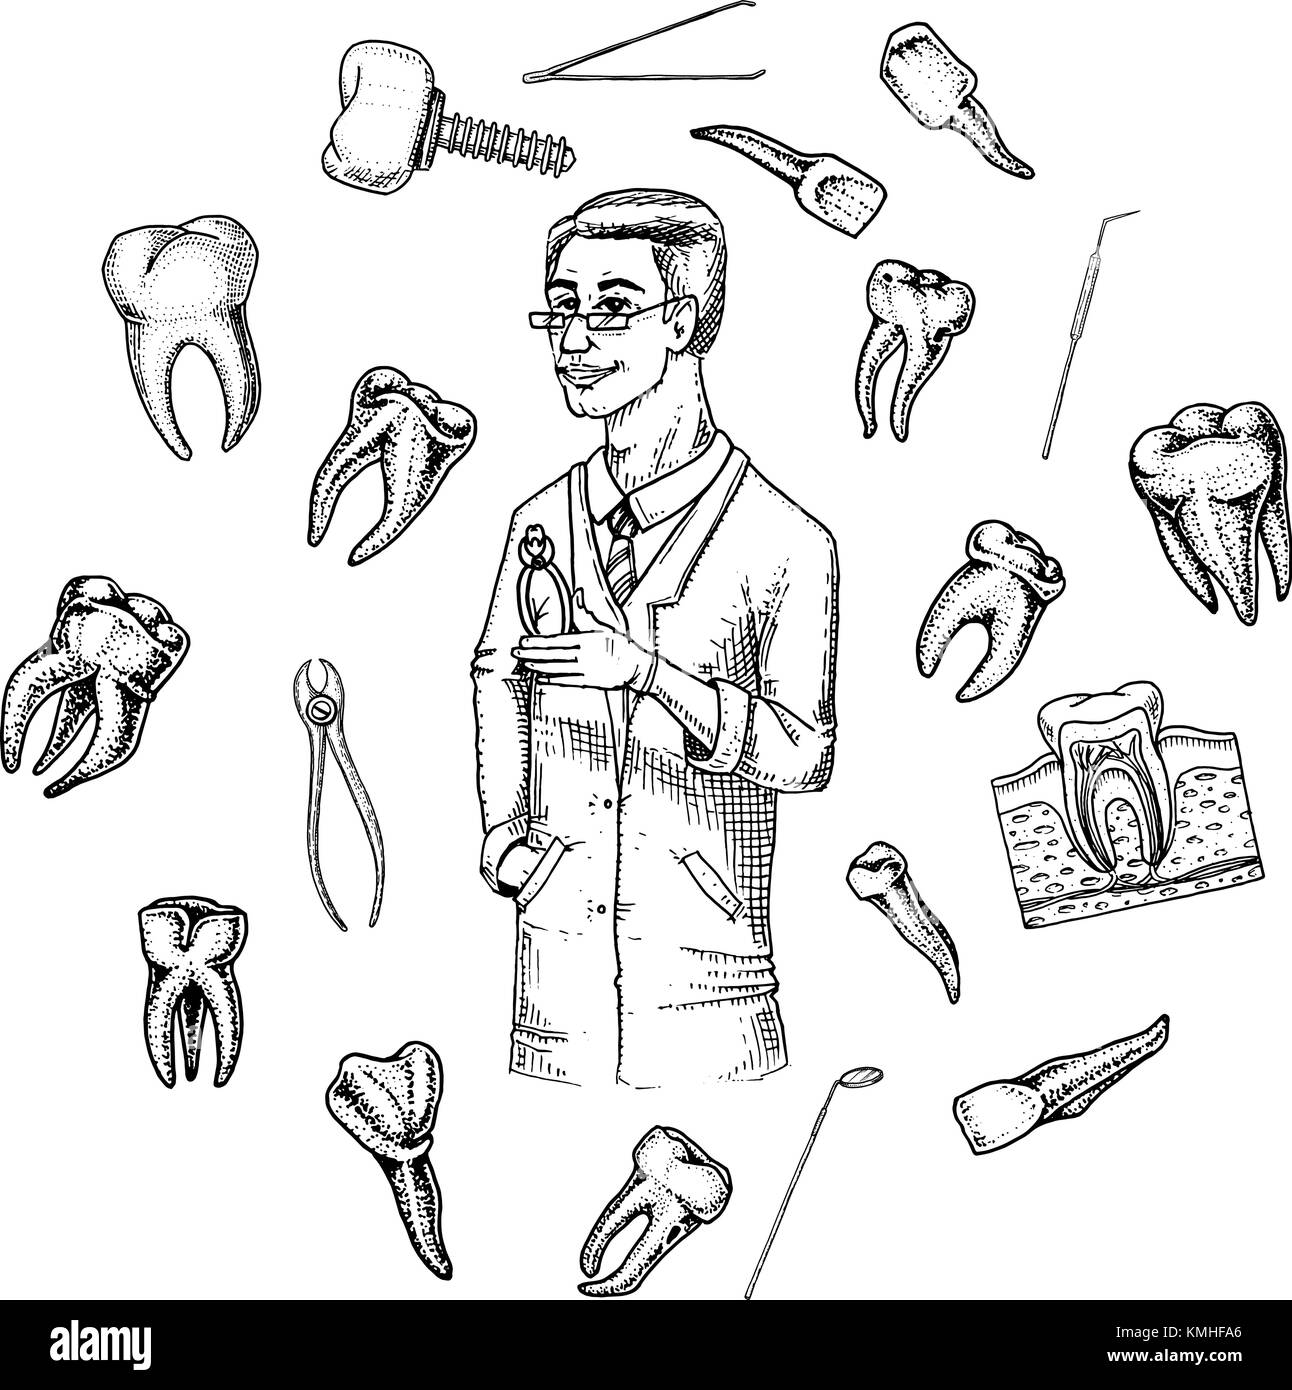 molar teeth enamel, dental set. instruments equipment of the dentist doctor. oral cavity clean or sick. health or caries human. engraved hand drawn in old or sketch. medicine, care for cavity, implant Stock Vector